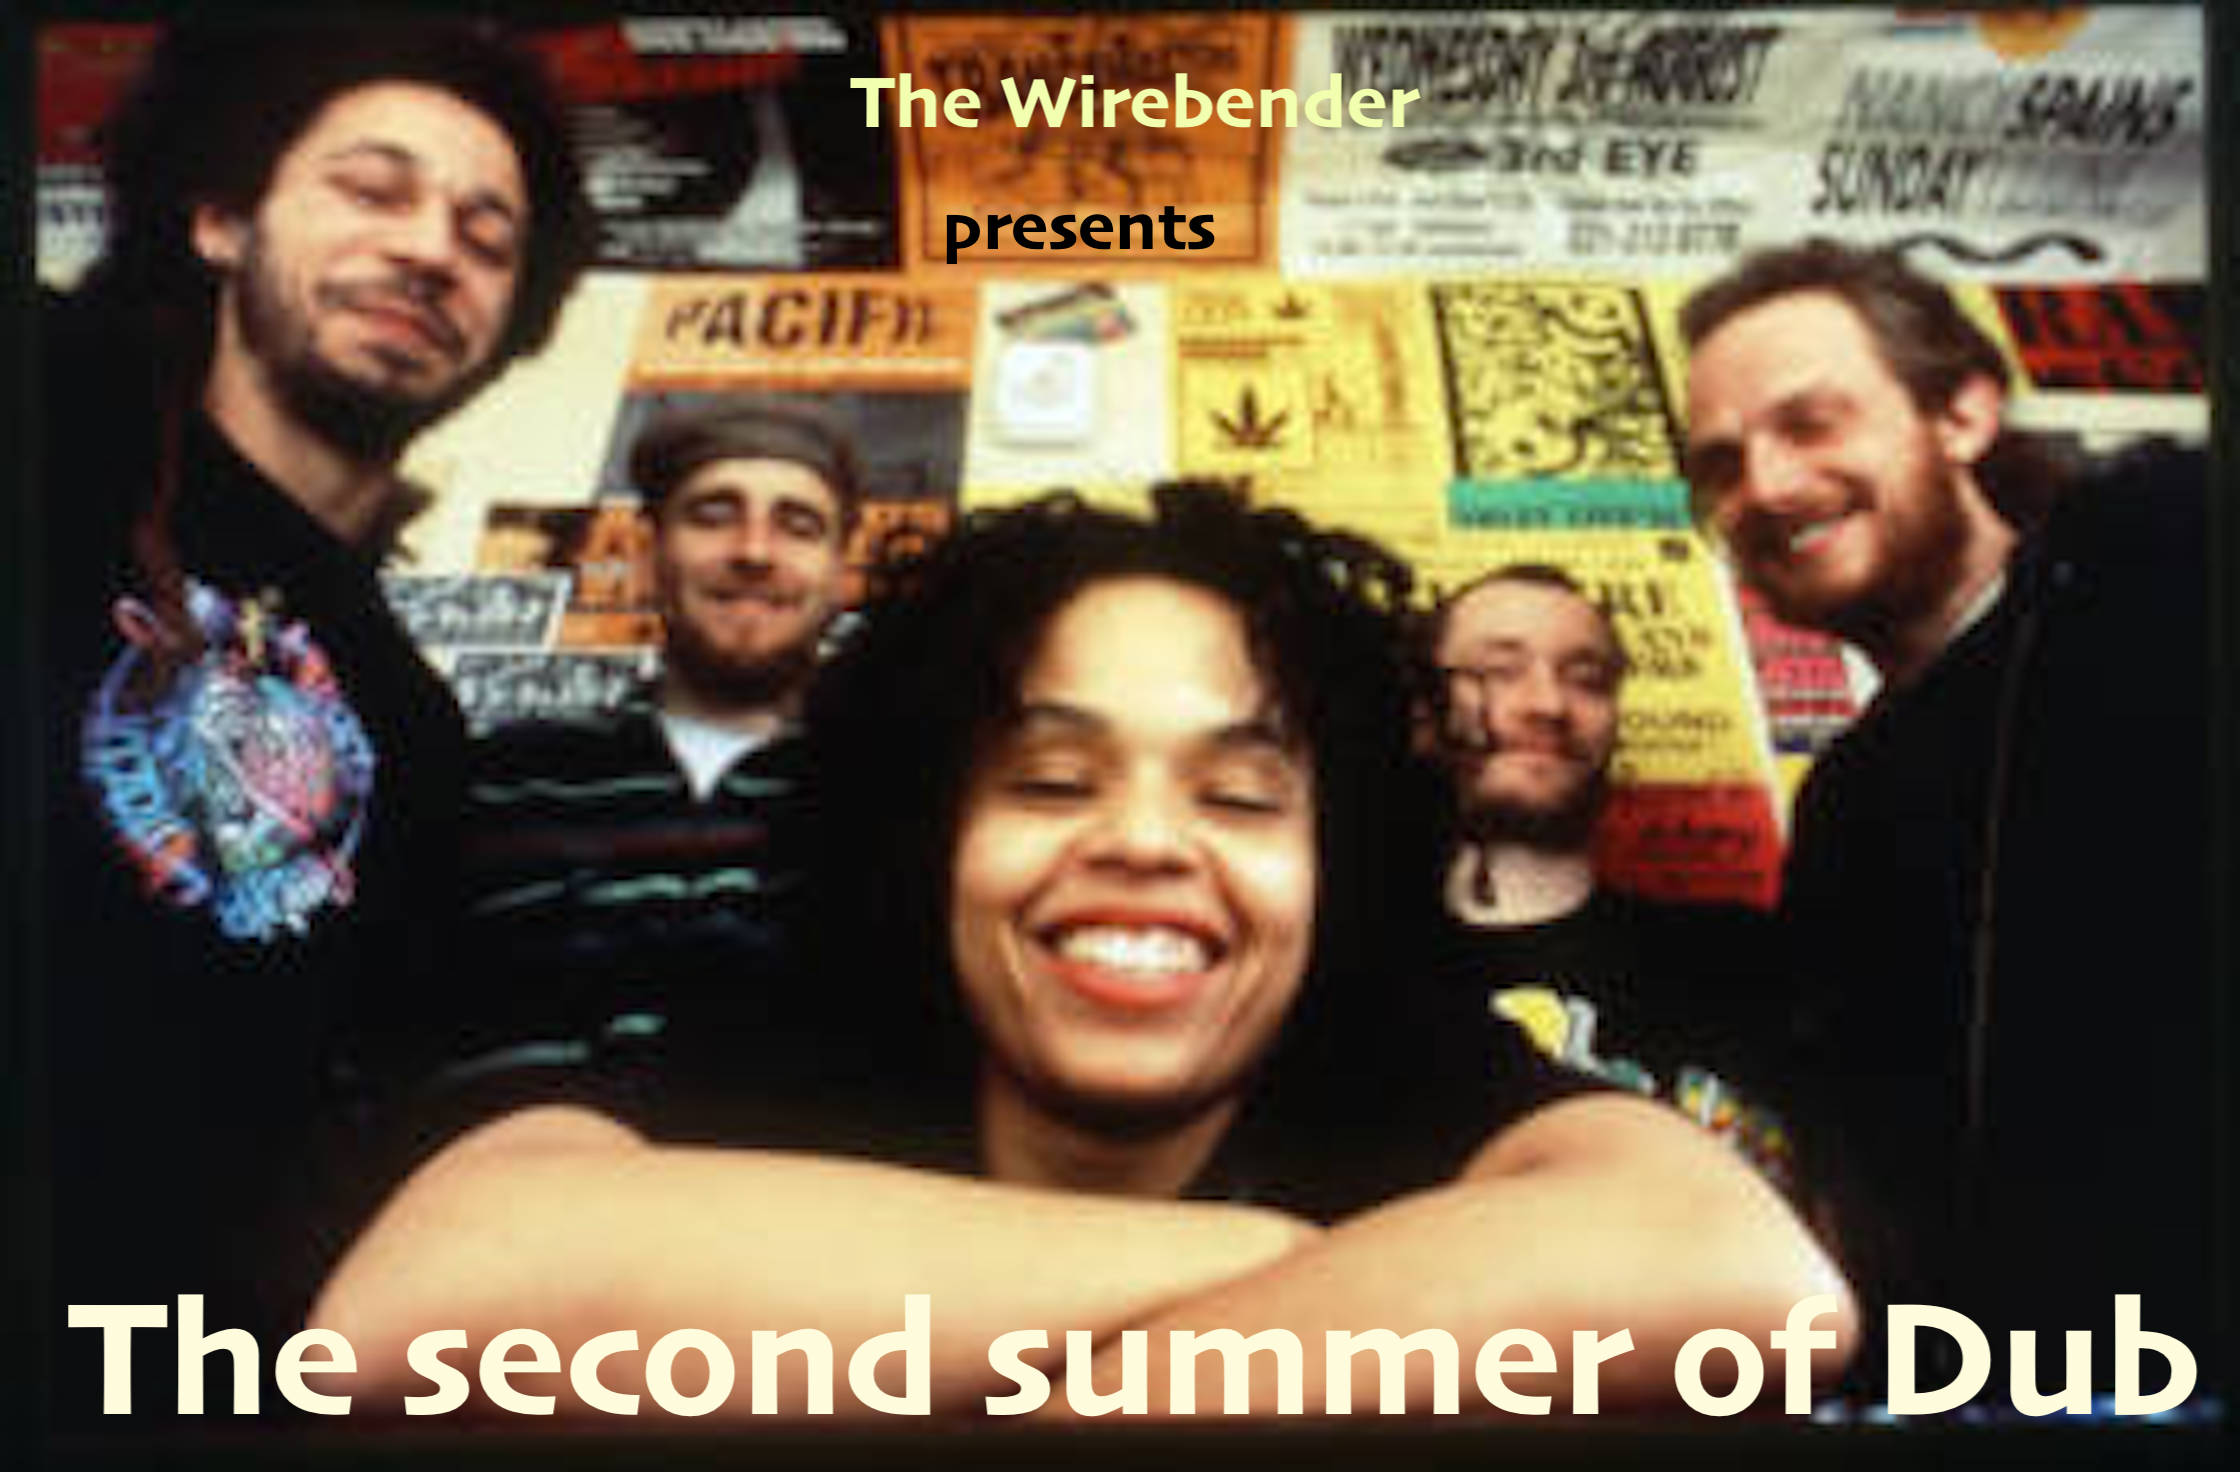 The Wirebender presents The second summer of Dub